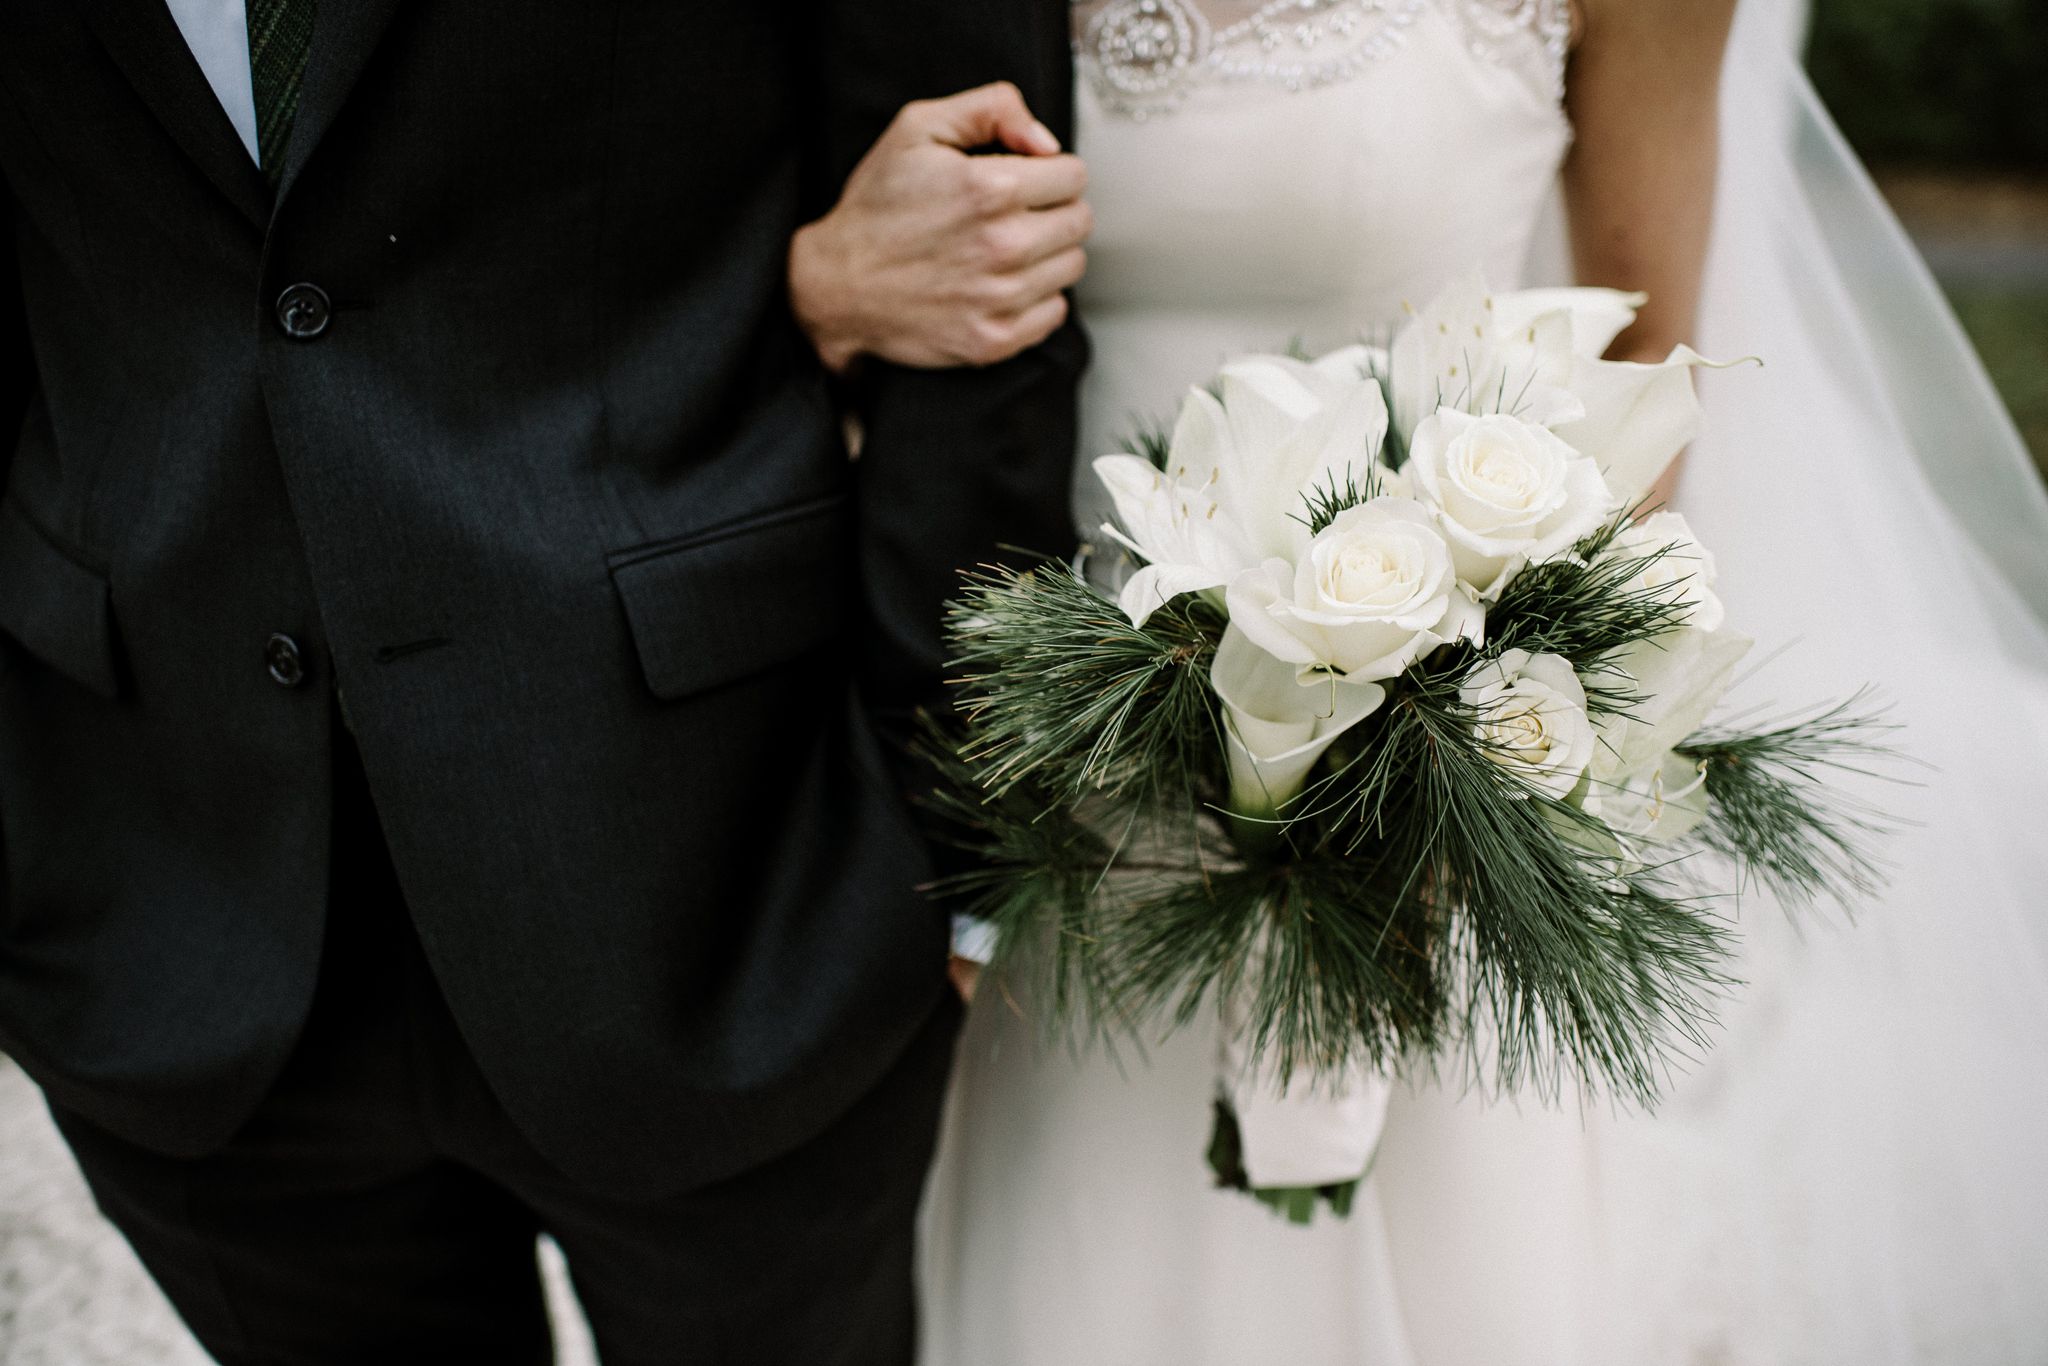 A closeup of the bride's bouquet of white roses and white lilies with greenery. Her arm is linked through the groom's arm. His hand is in his pocket.